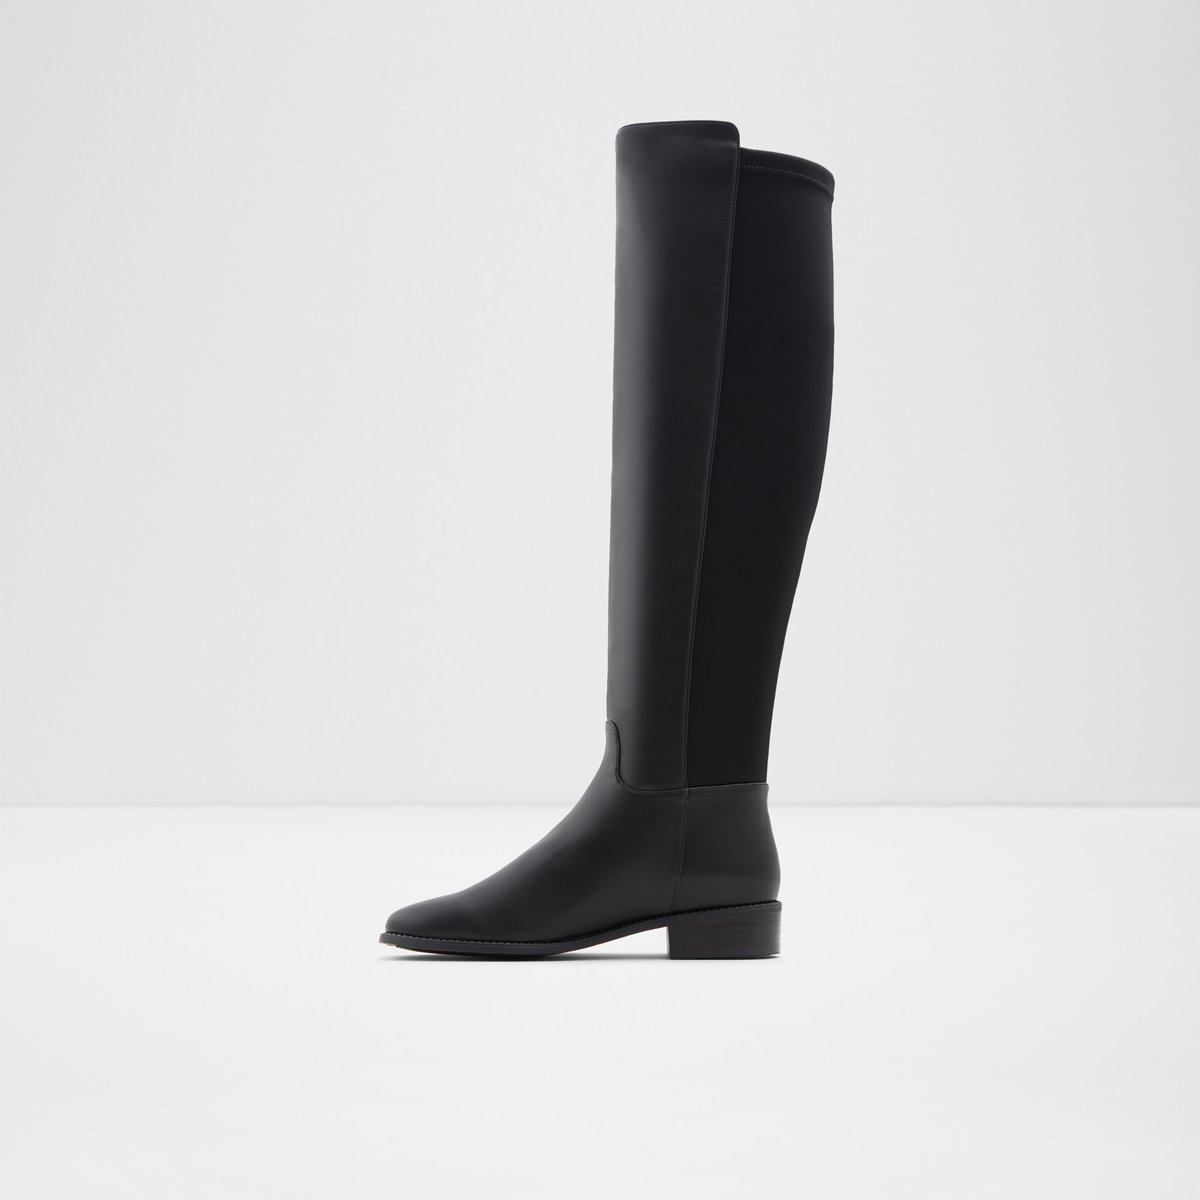 Aahliyah Black Synthetic Smooth Women's Casual boots | ALDO Canada